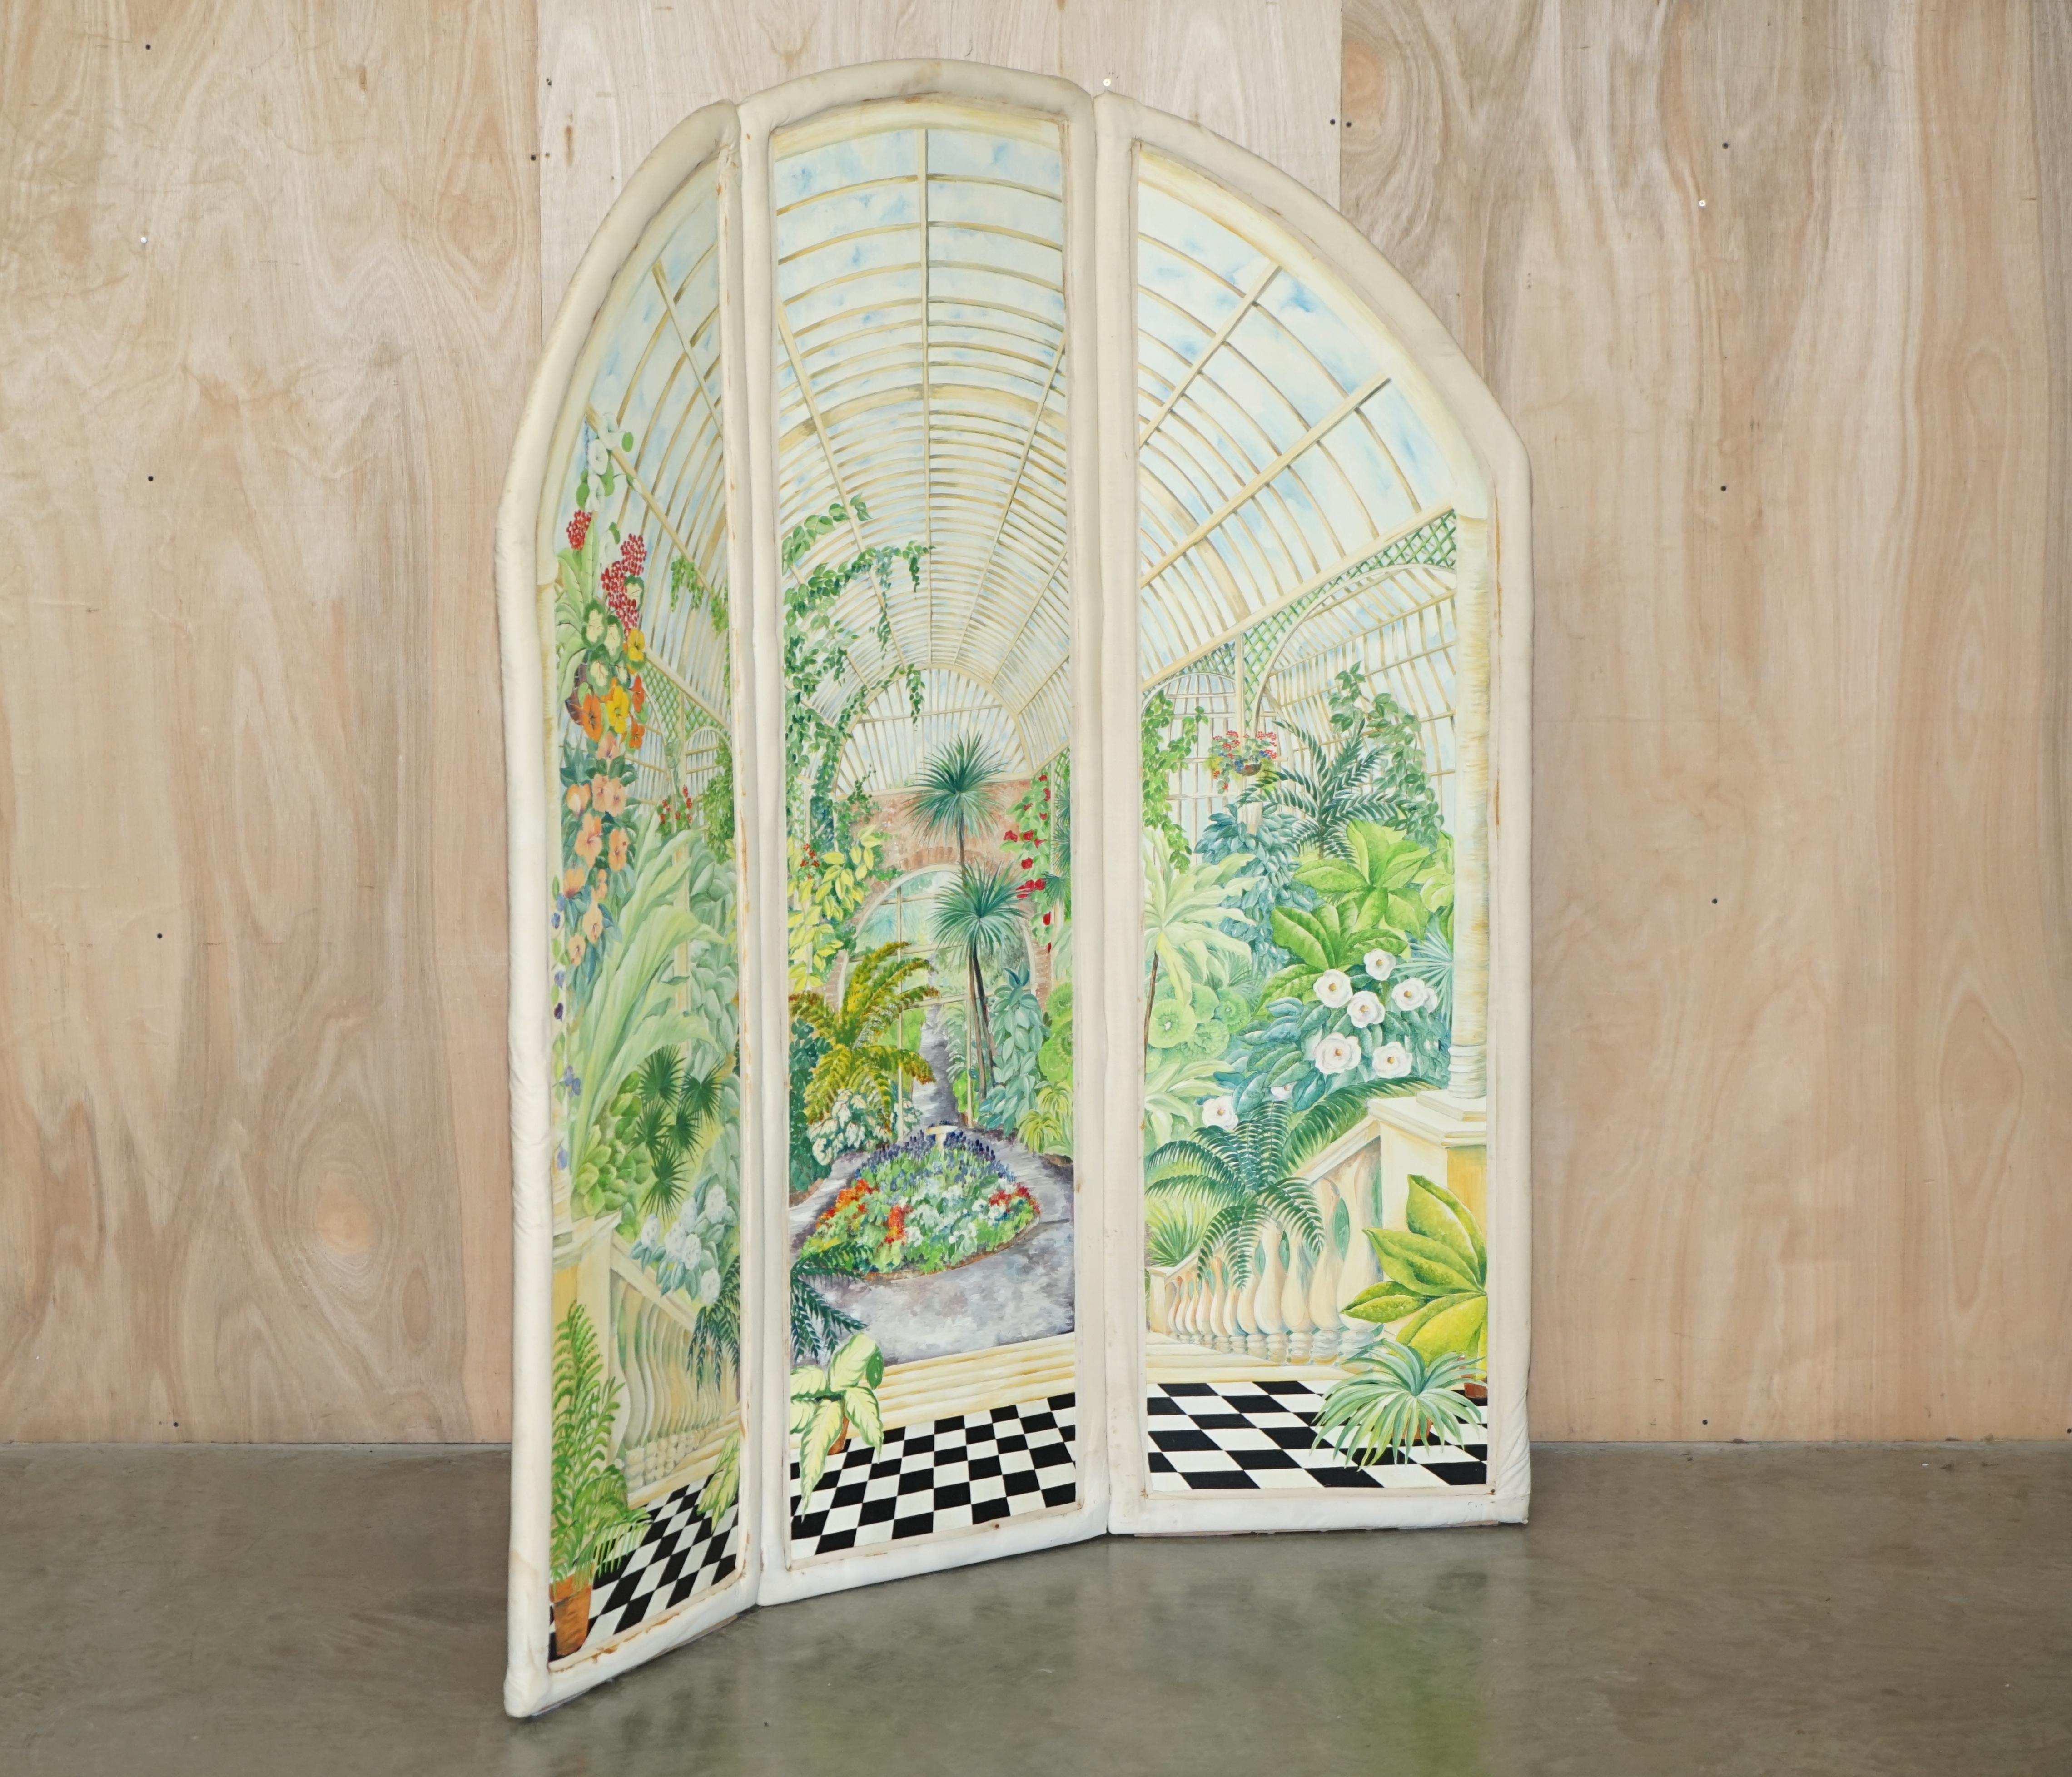 Royal House Antiques

Royal House Antiques is delighted to offer for sale this absolutely stunning, hand made in France, Watercolor room divider of large proportions  

Please note the delivery fee listed is just a guide, it covers within the M25